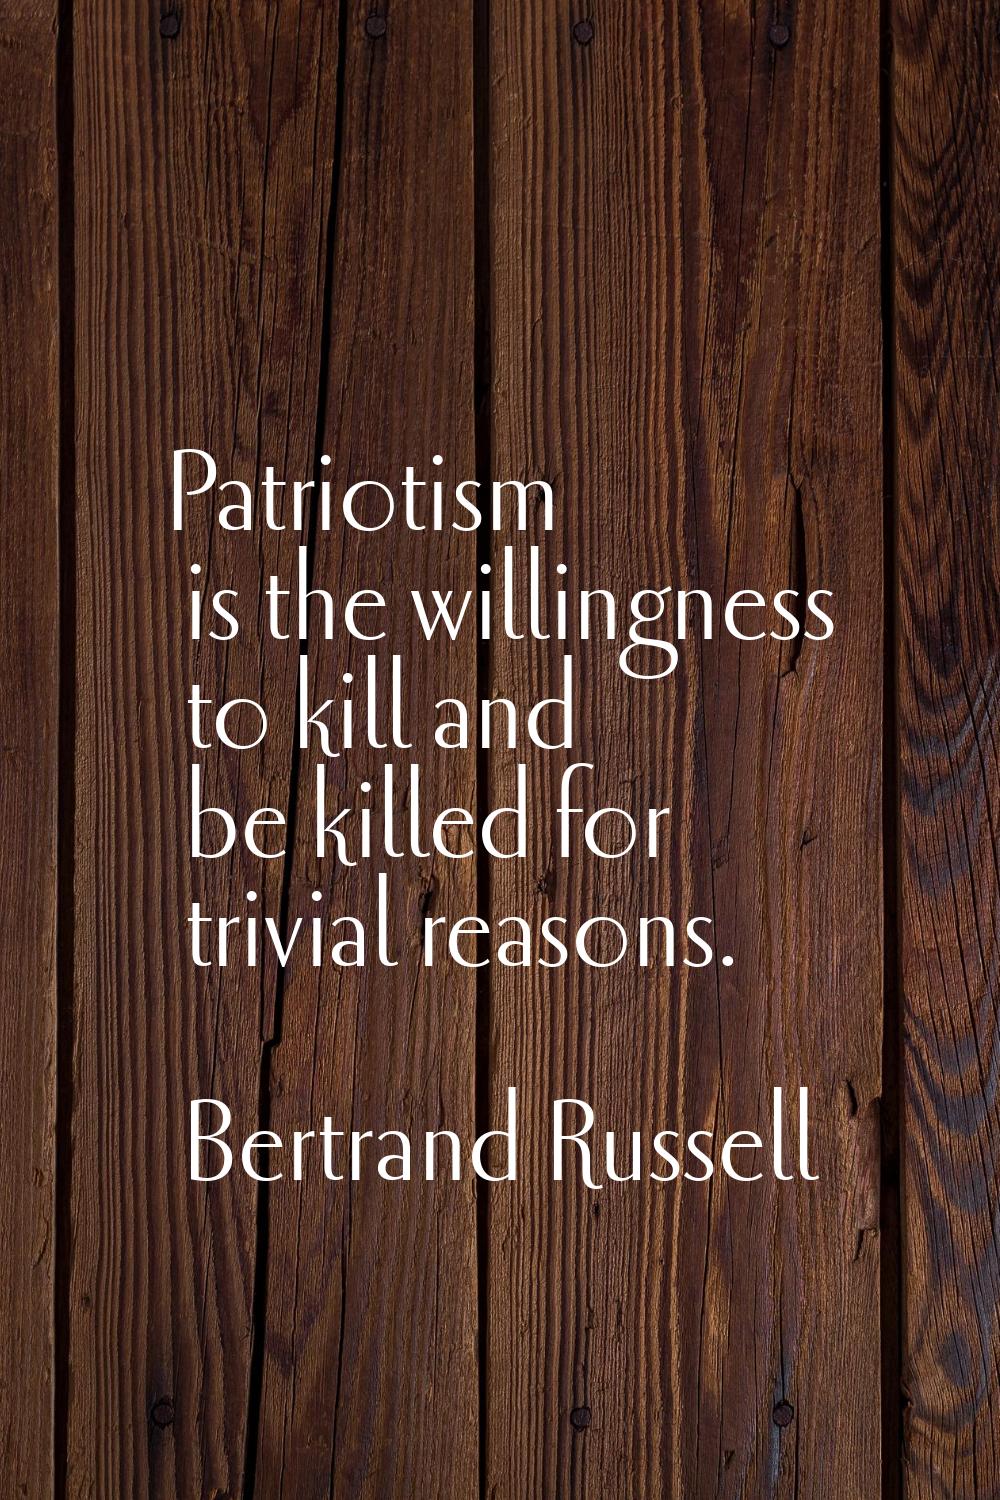 Patriotism is the willingness to kill and be killed for trivial reasons.